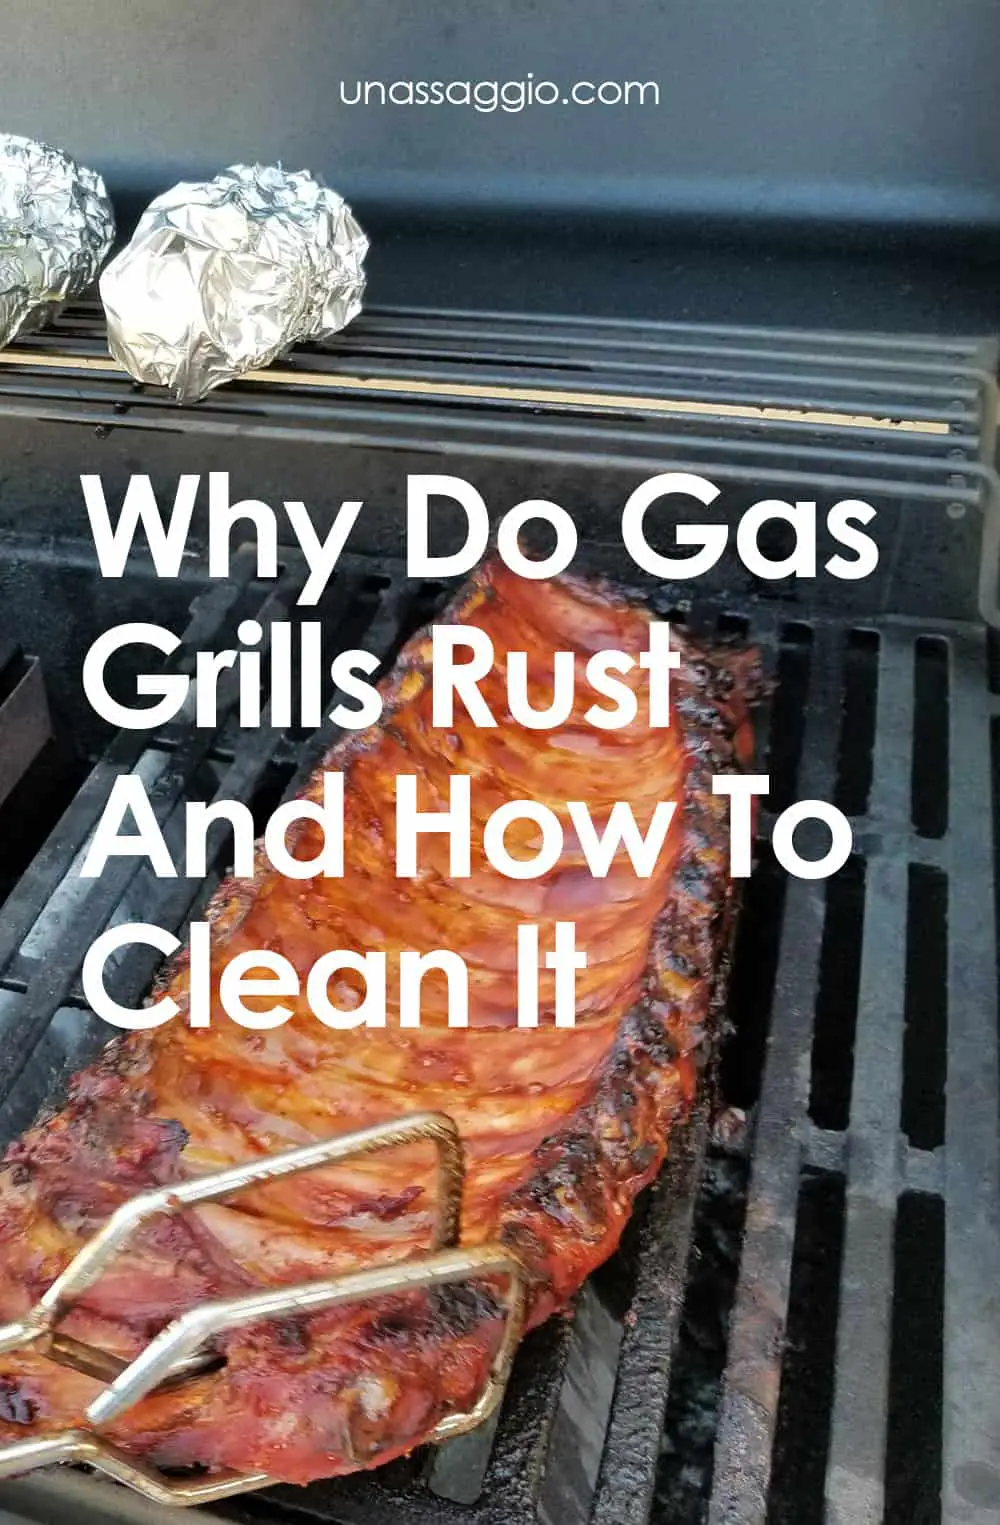 Why Do Gas Grills Rust And How To Clean It